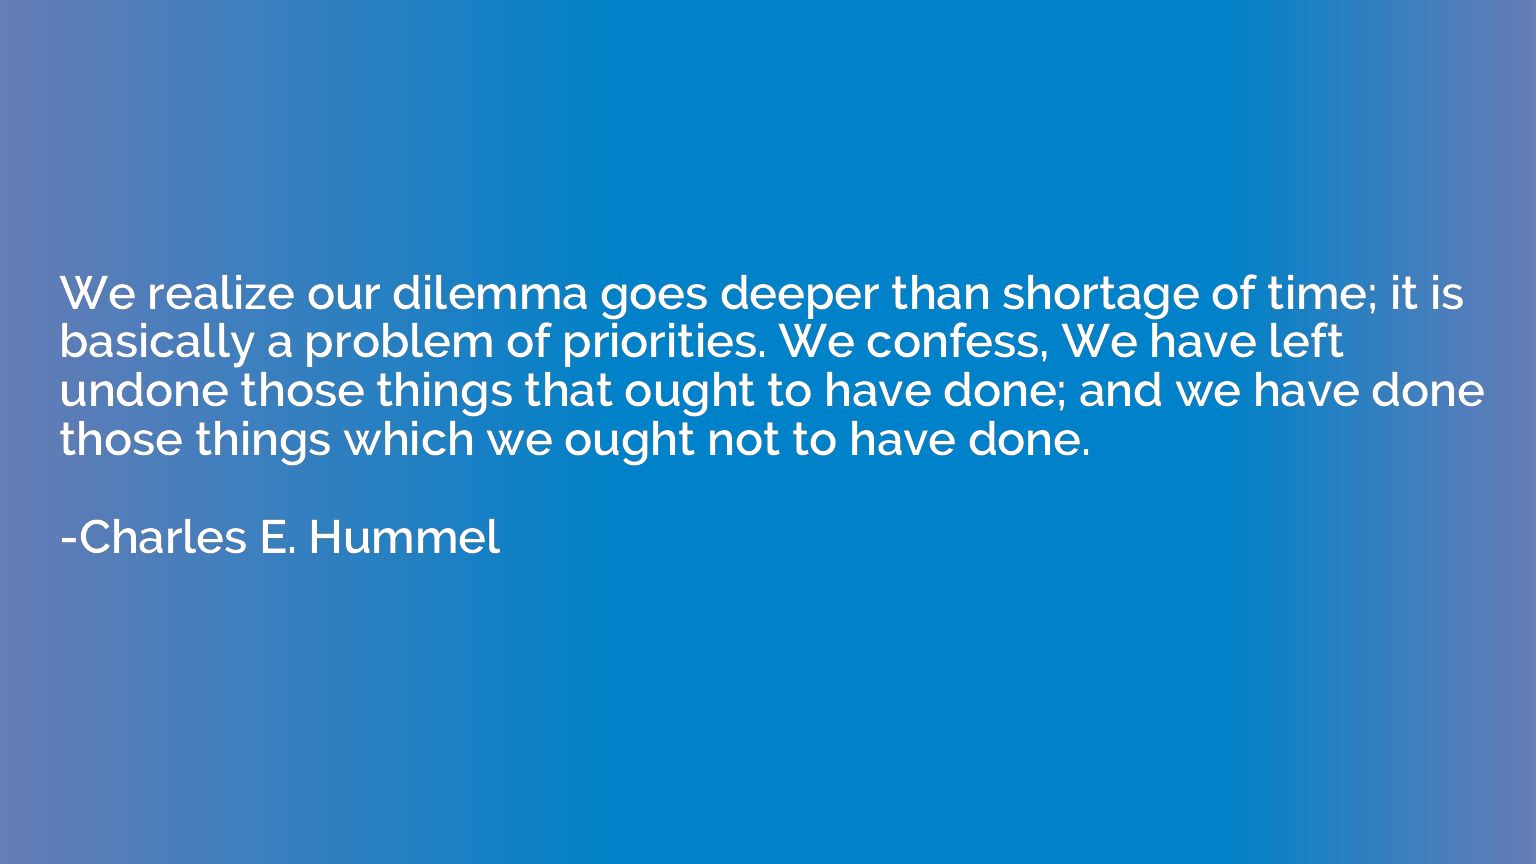 We realize our dilemma goes deeper than shortage of time; it